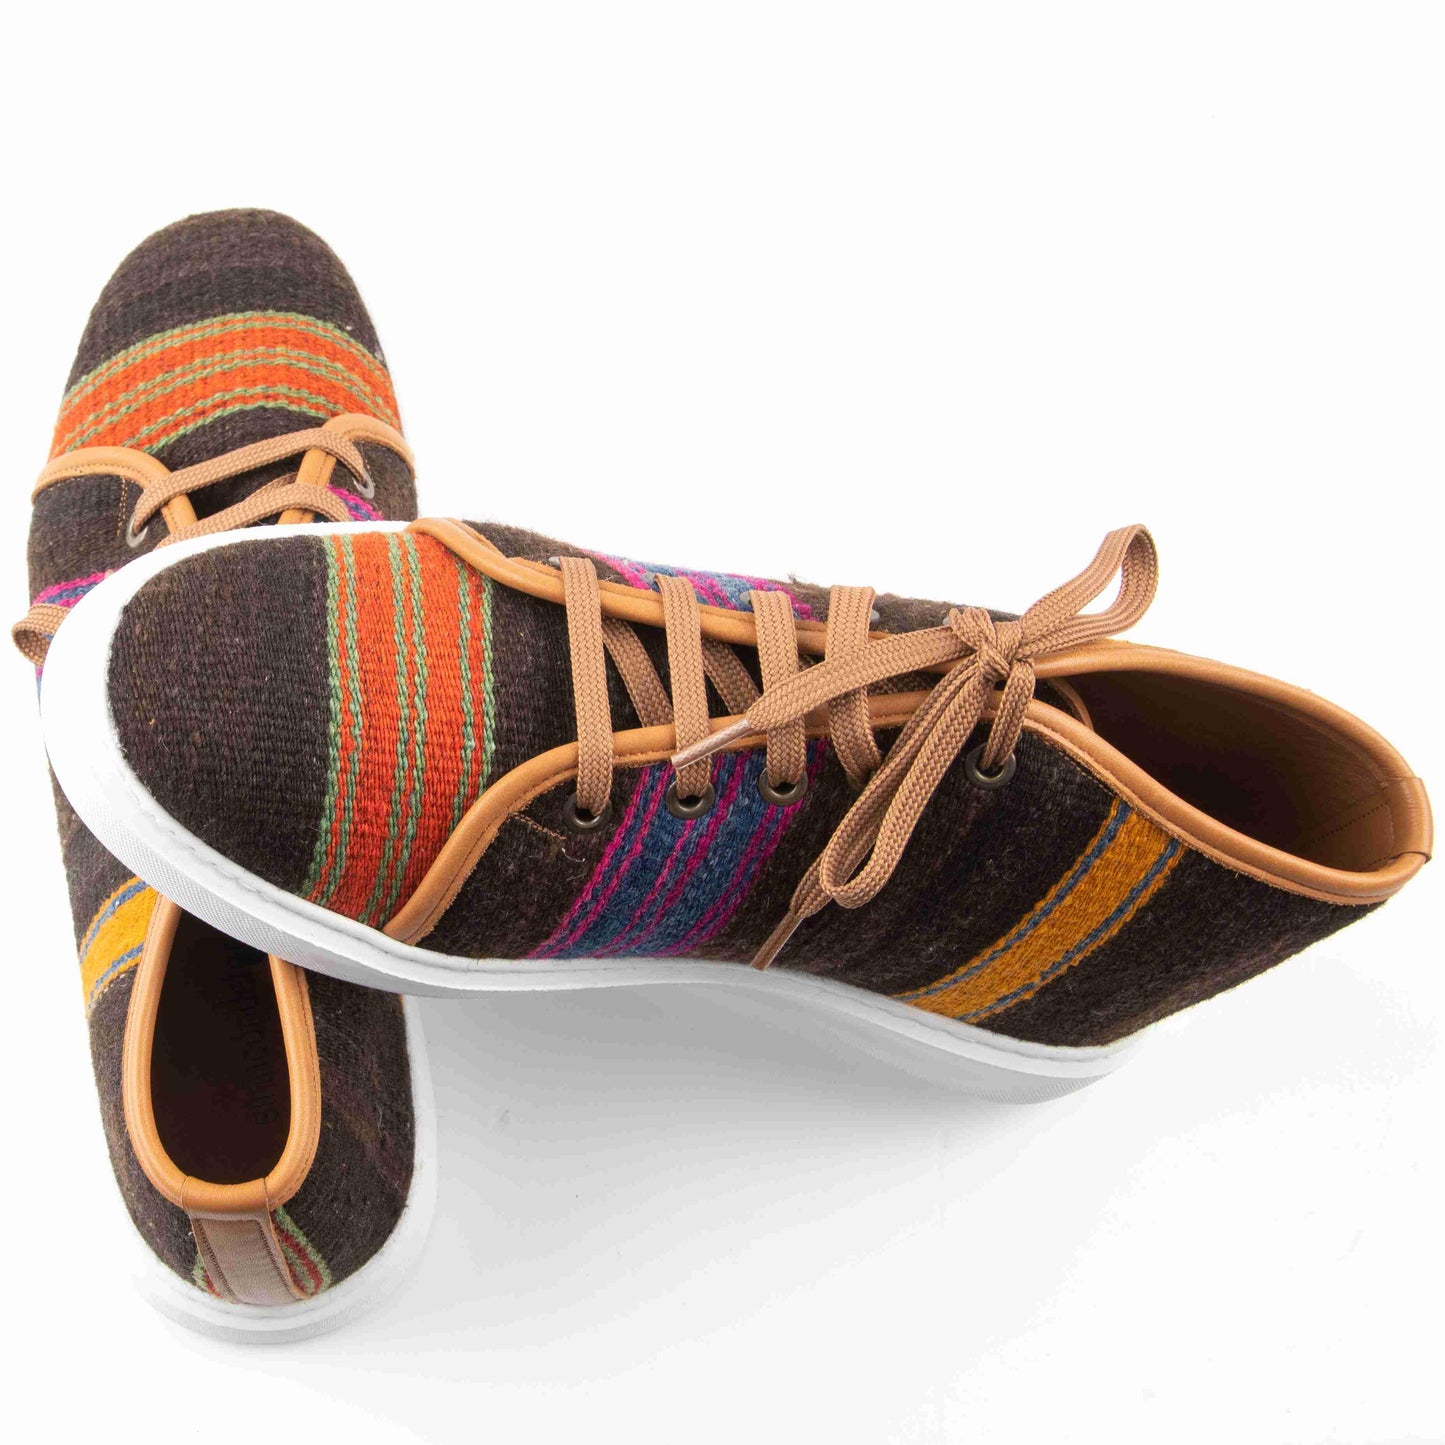 Ethnic Man Slip-On Shoes Crafted From Handmade Kilim and Real Leather Size 11 Base Width: 10 cm - Base Length: 30,5 cm